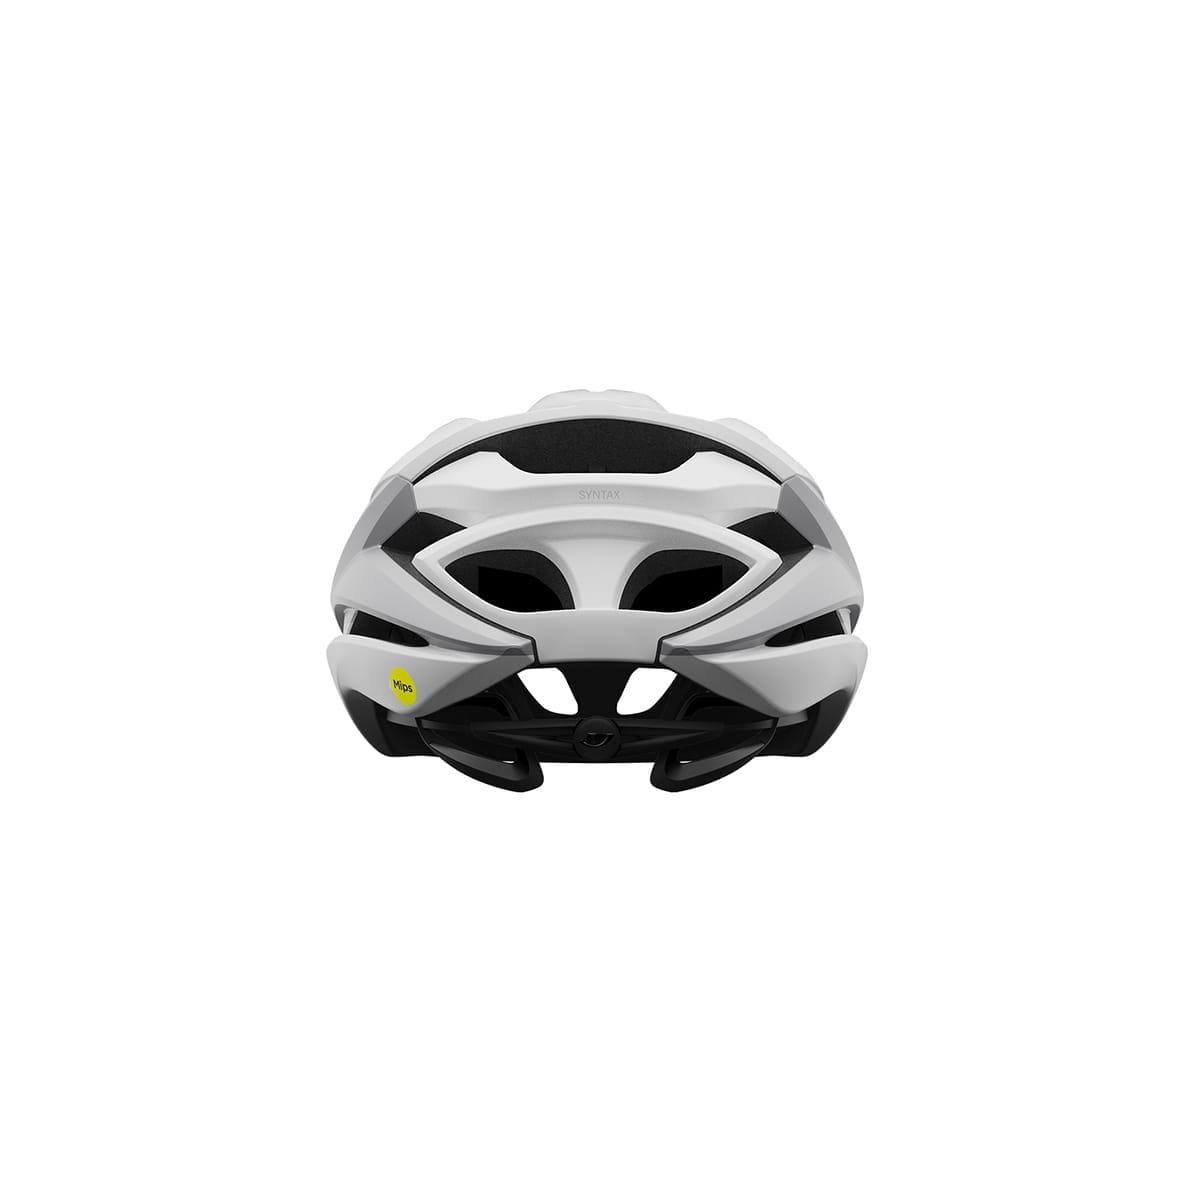 Casque Route GIRO SYNTAX MIPS Blanc/Argent